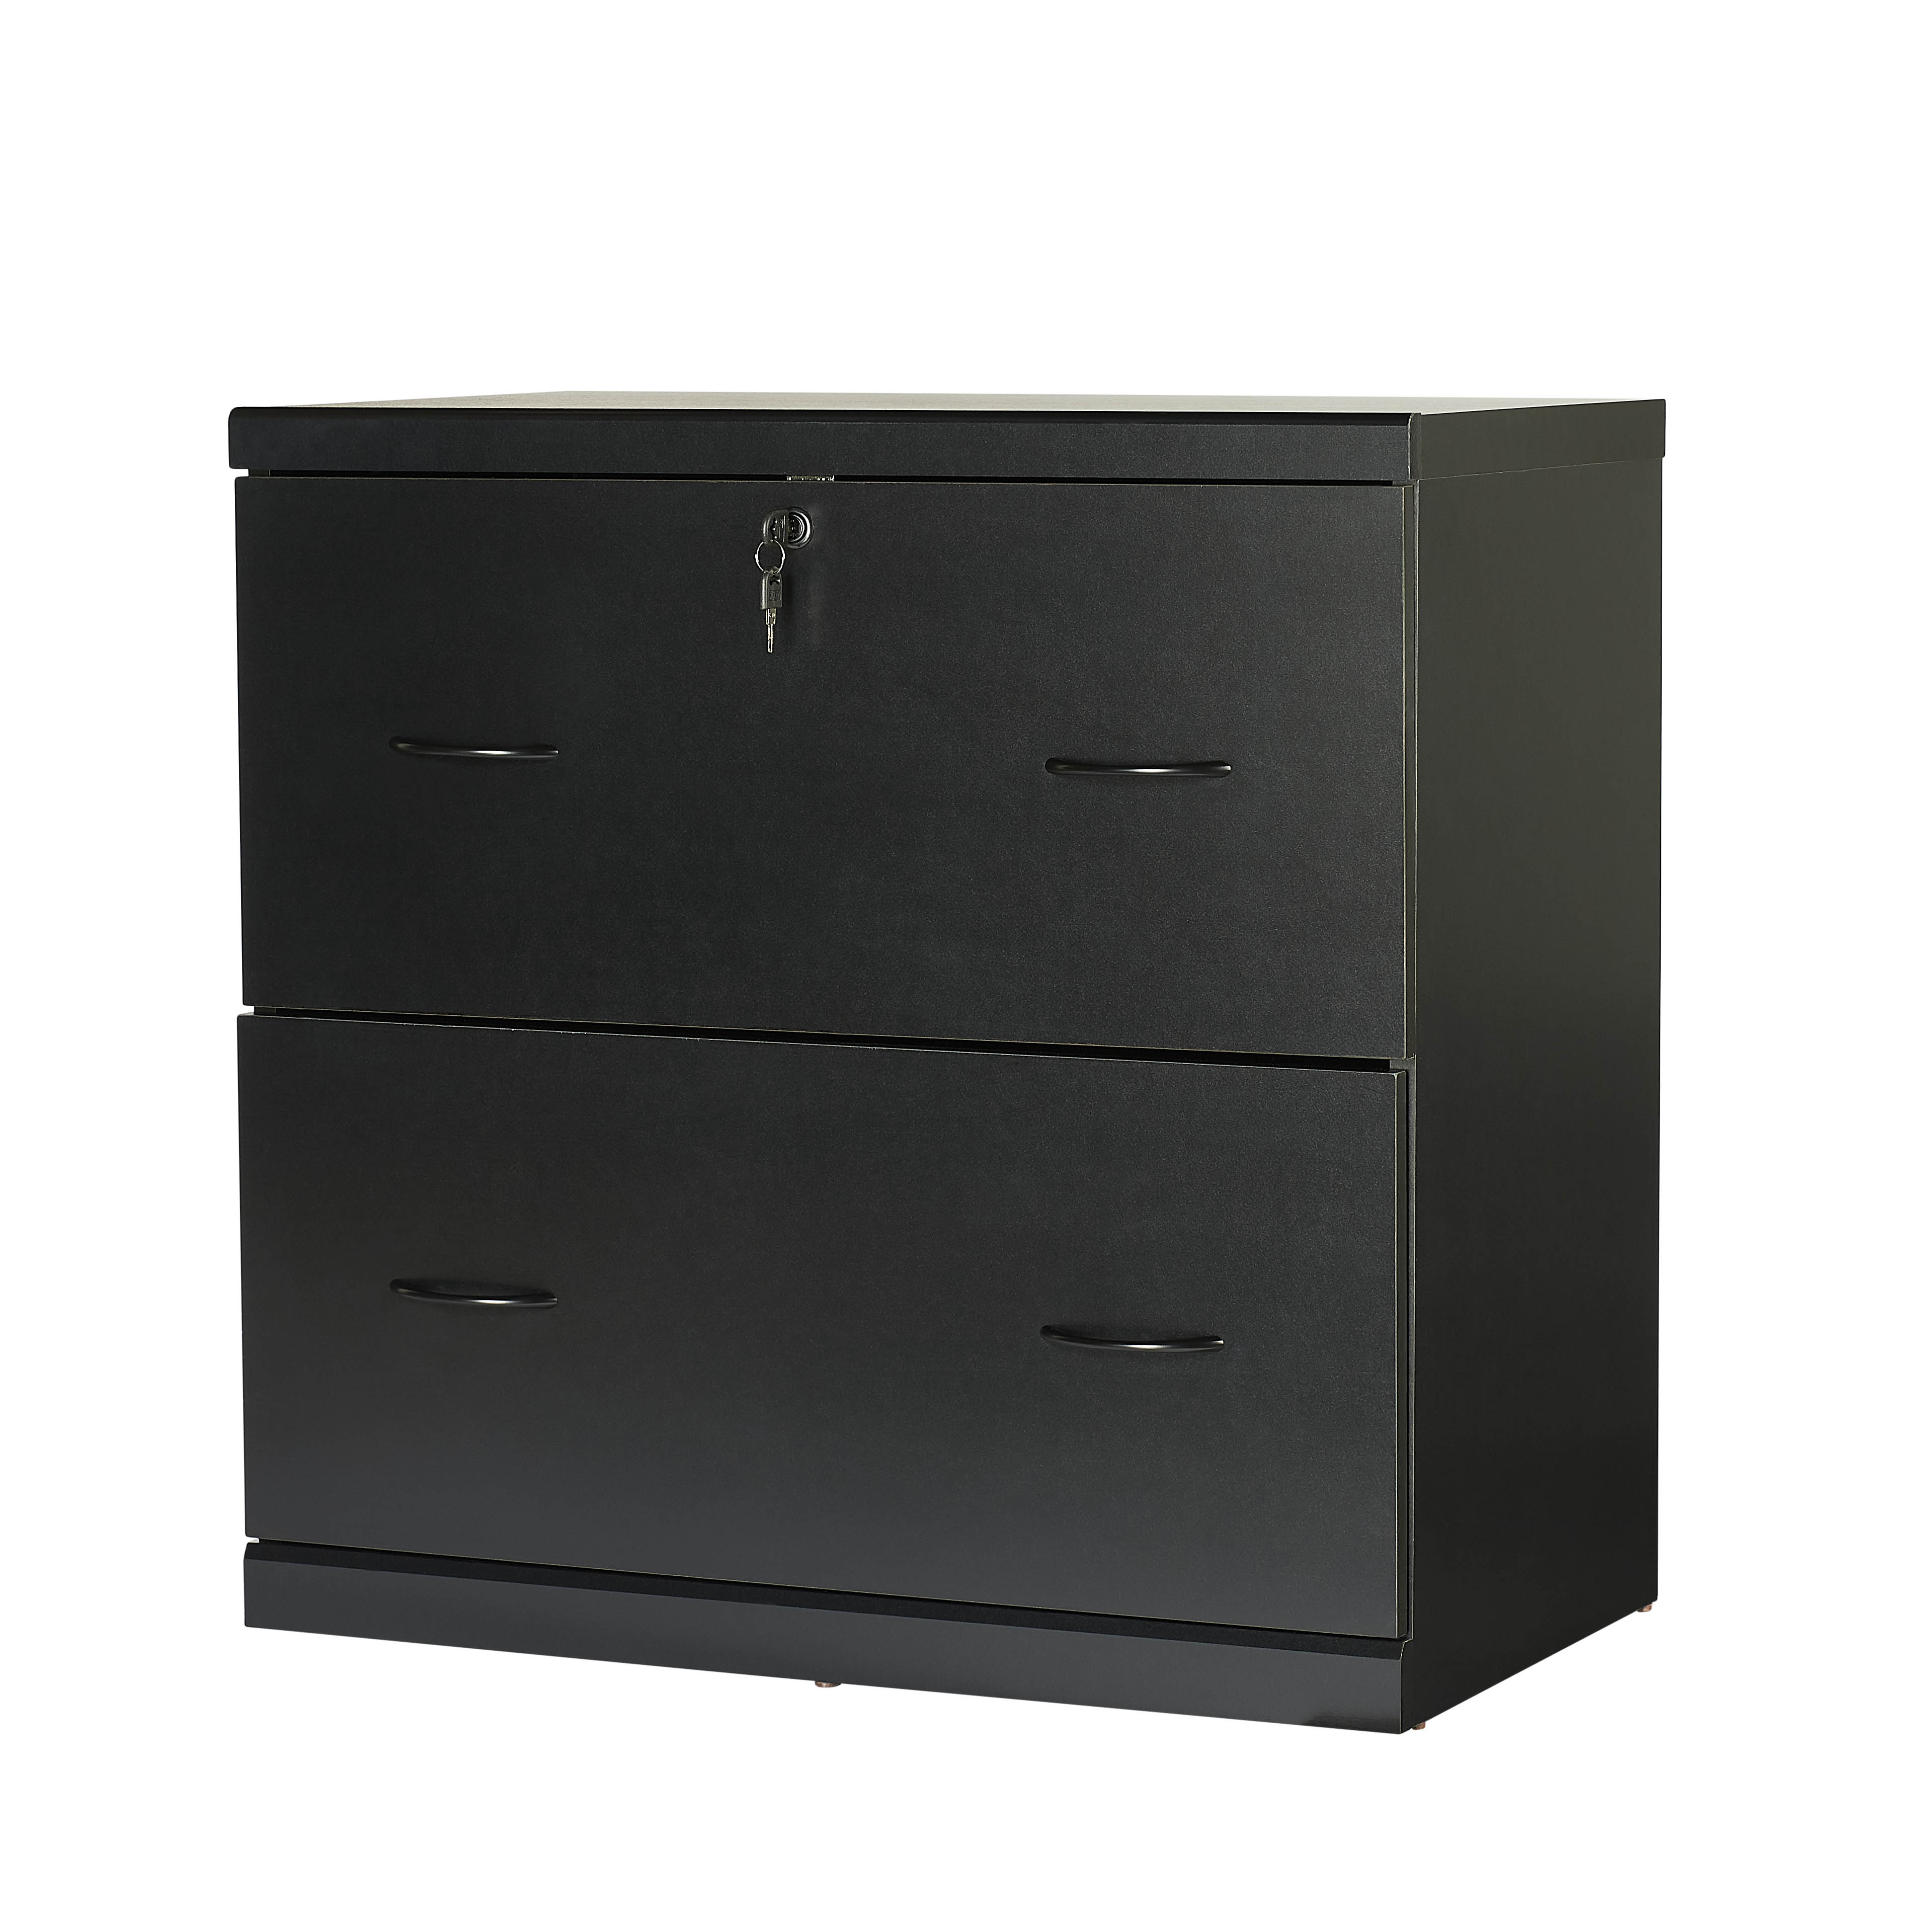 Mainstays 2 Drawer Lateral Locking File Cabinet Walmart within sizing 3840 X 3840